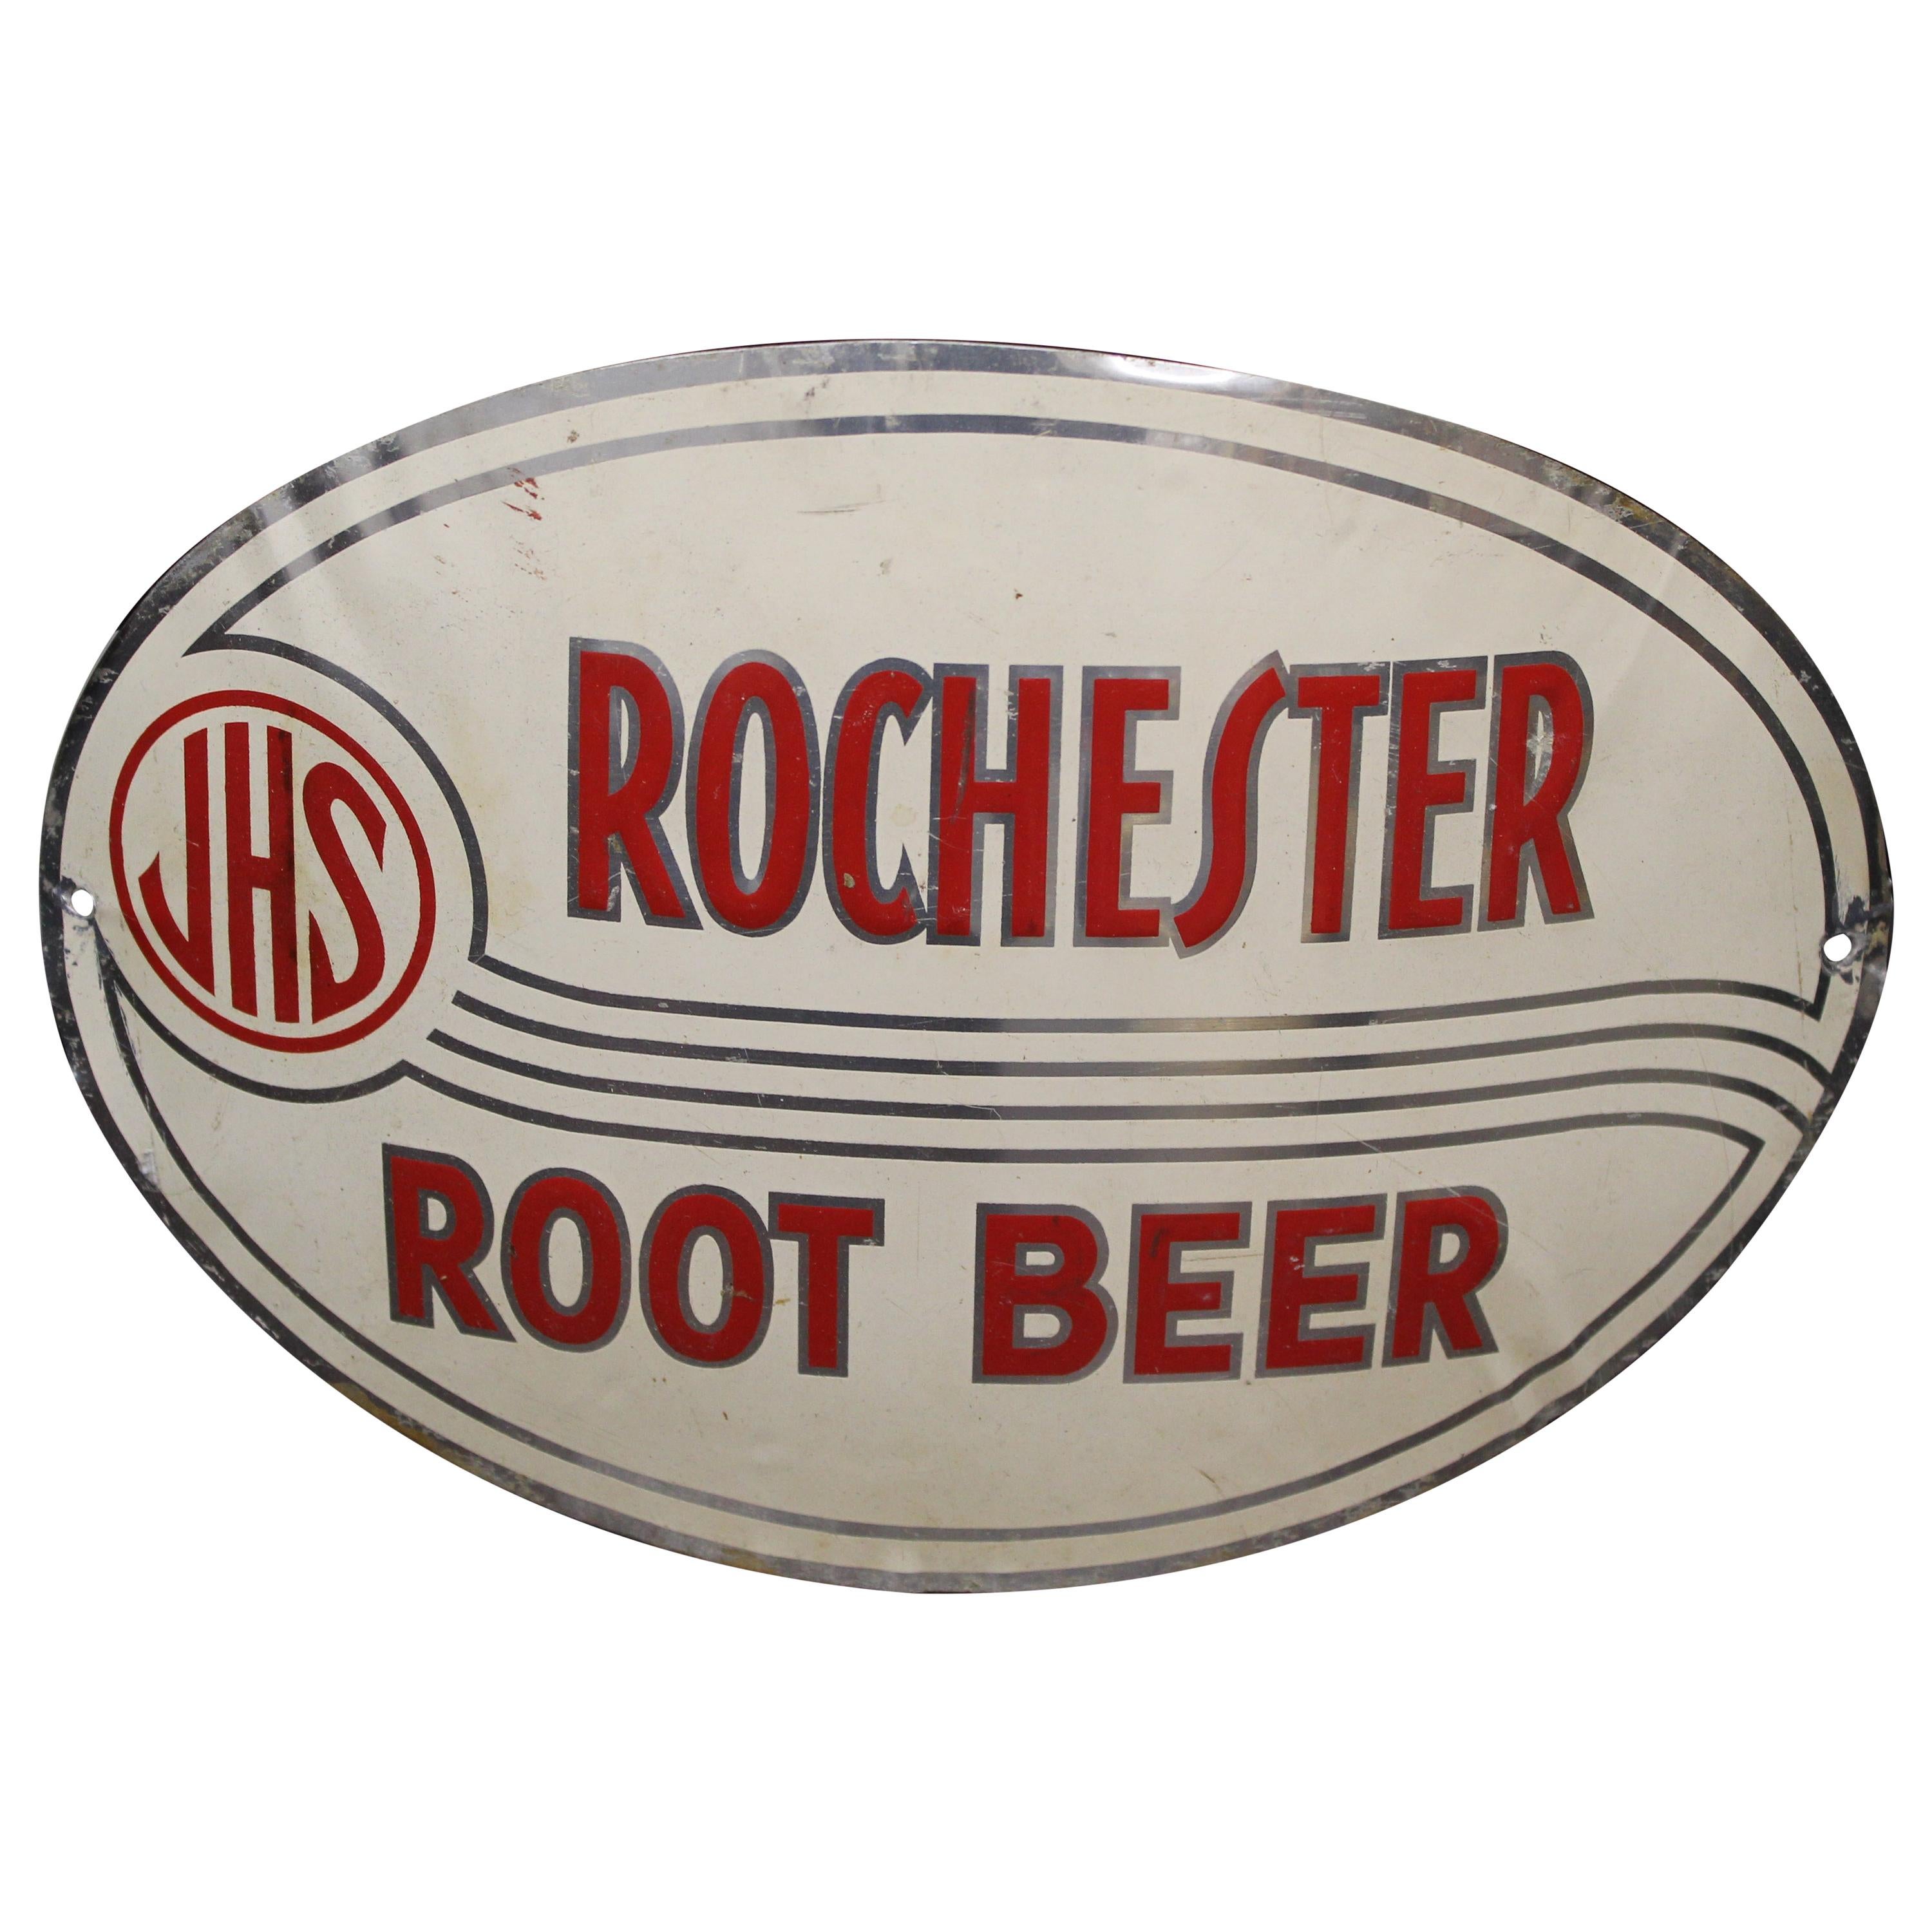 1930s-1940s JHS Rochester Root Beer Sign For Sale